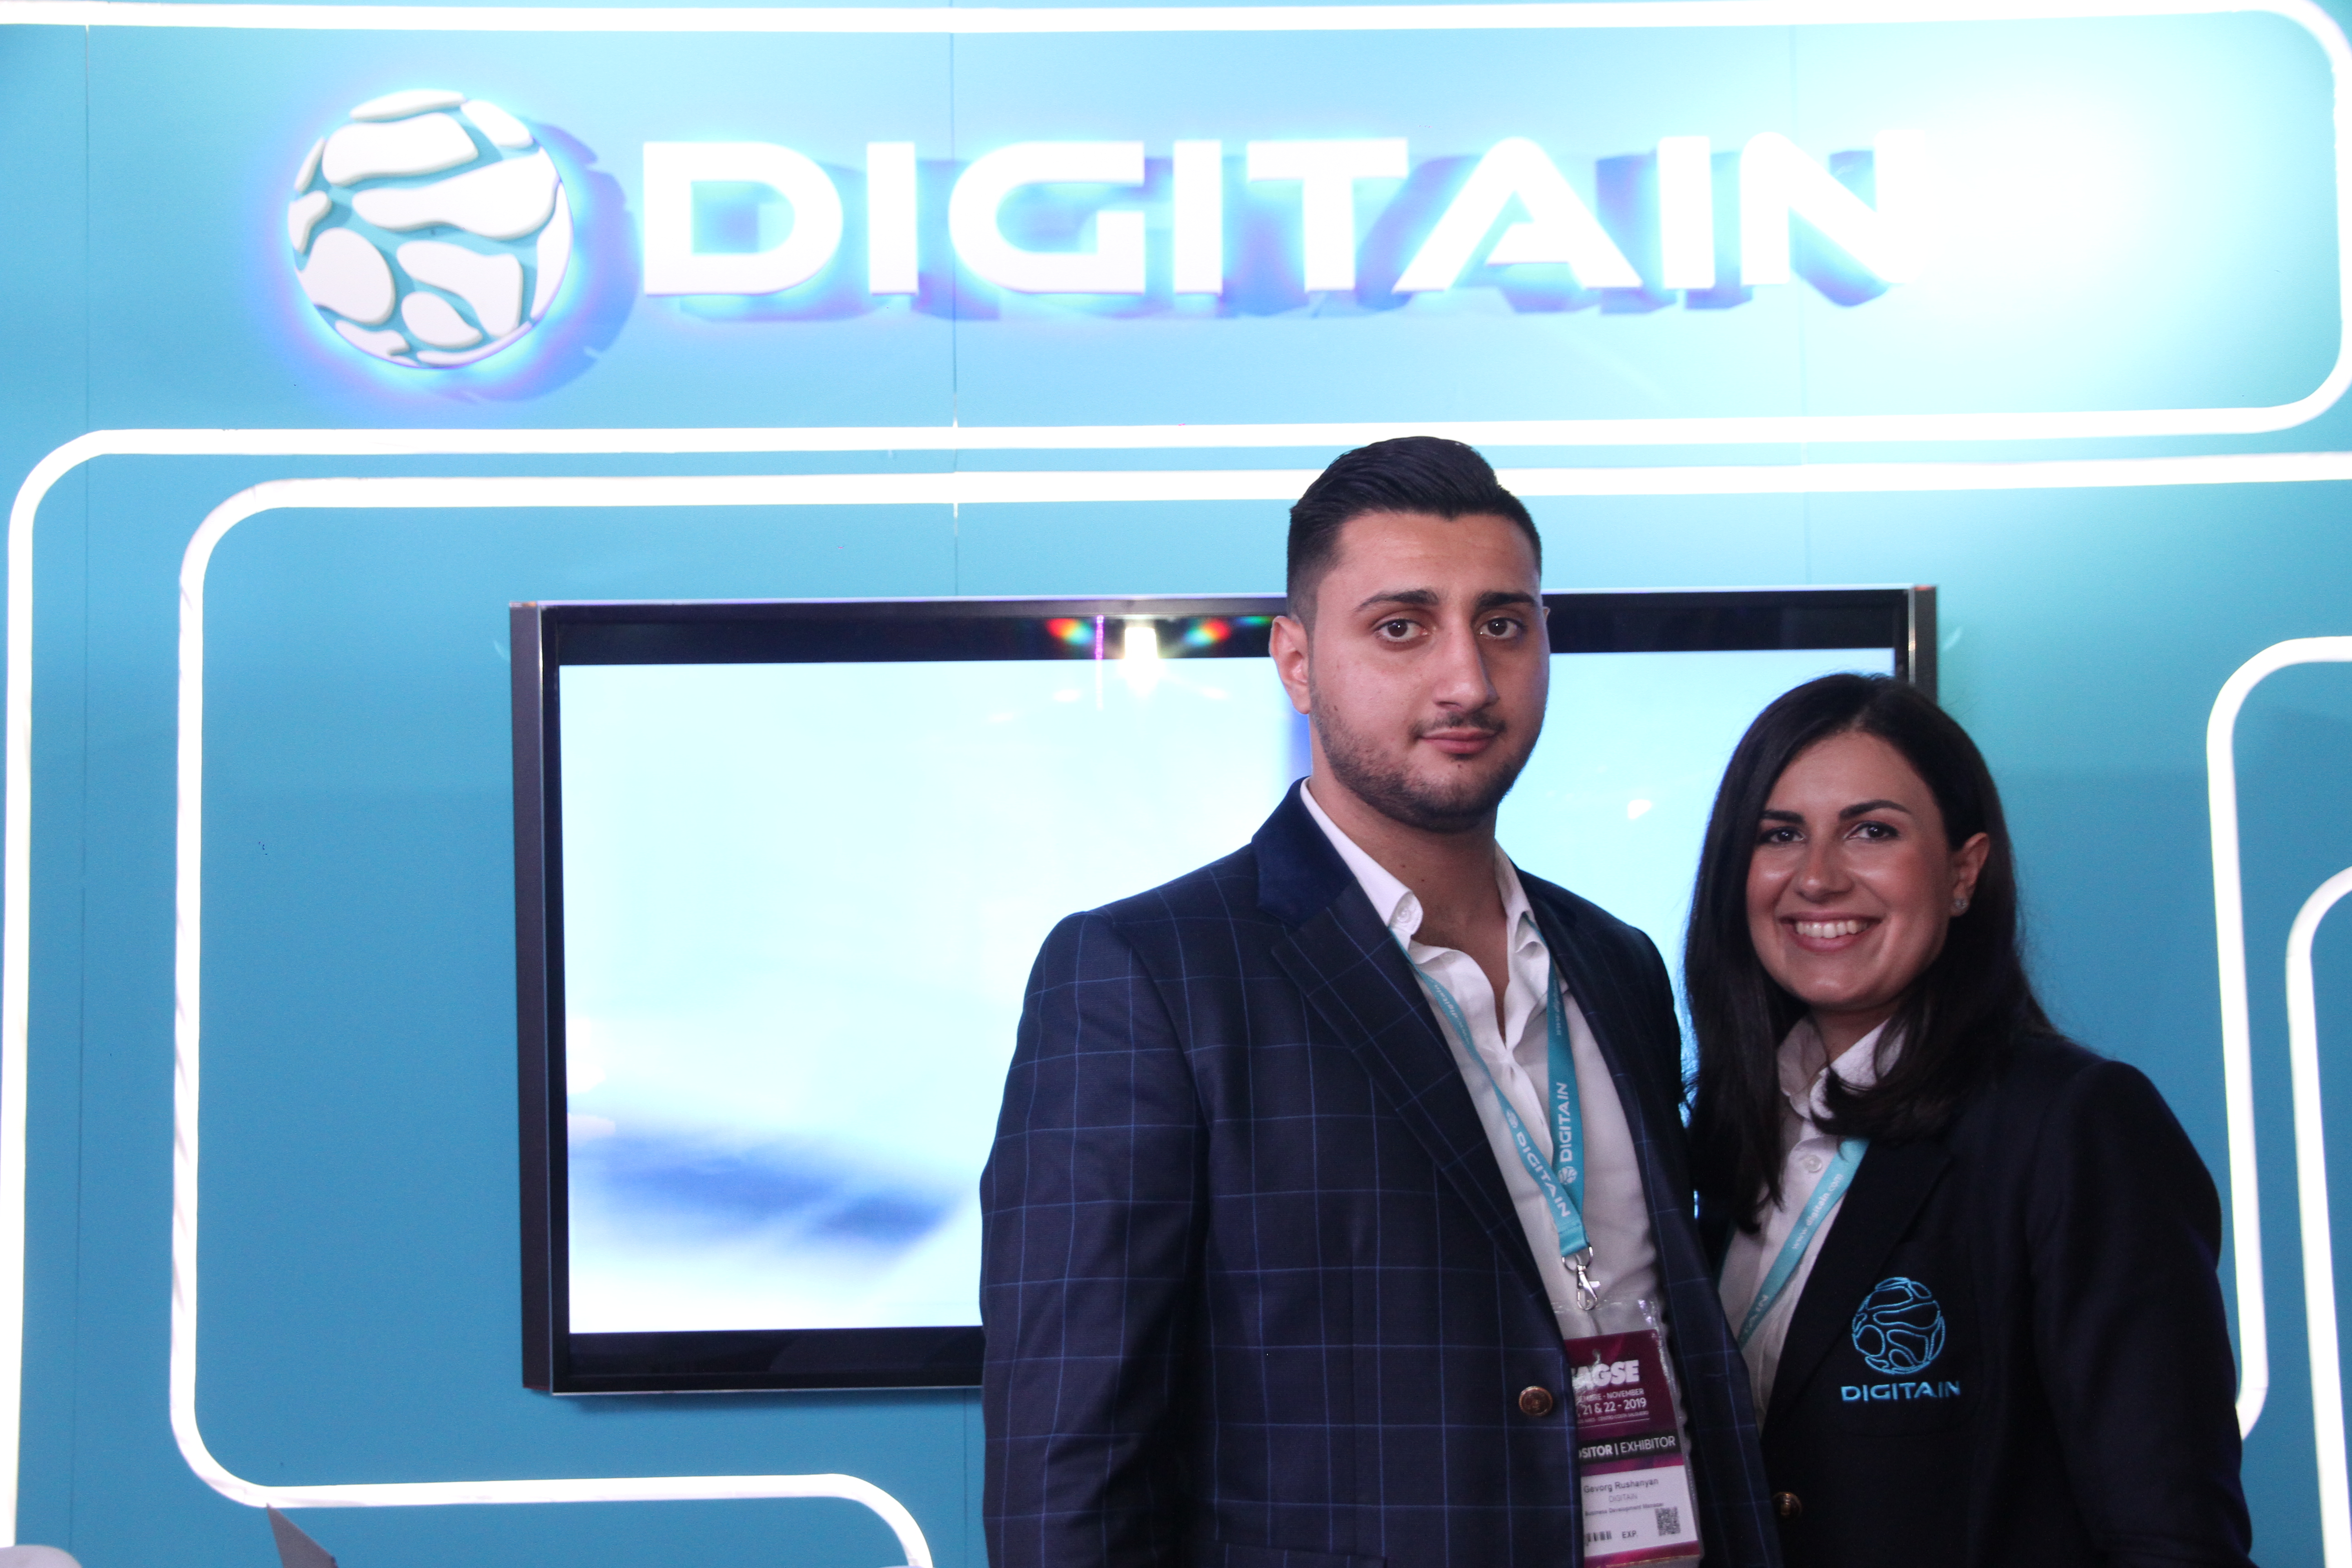 Digitain's booth